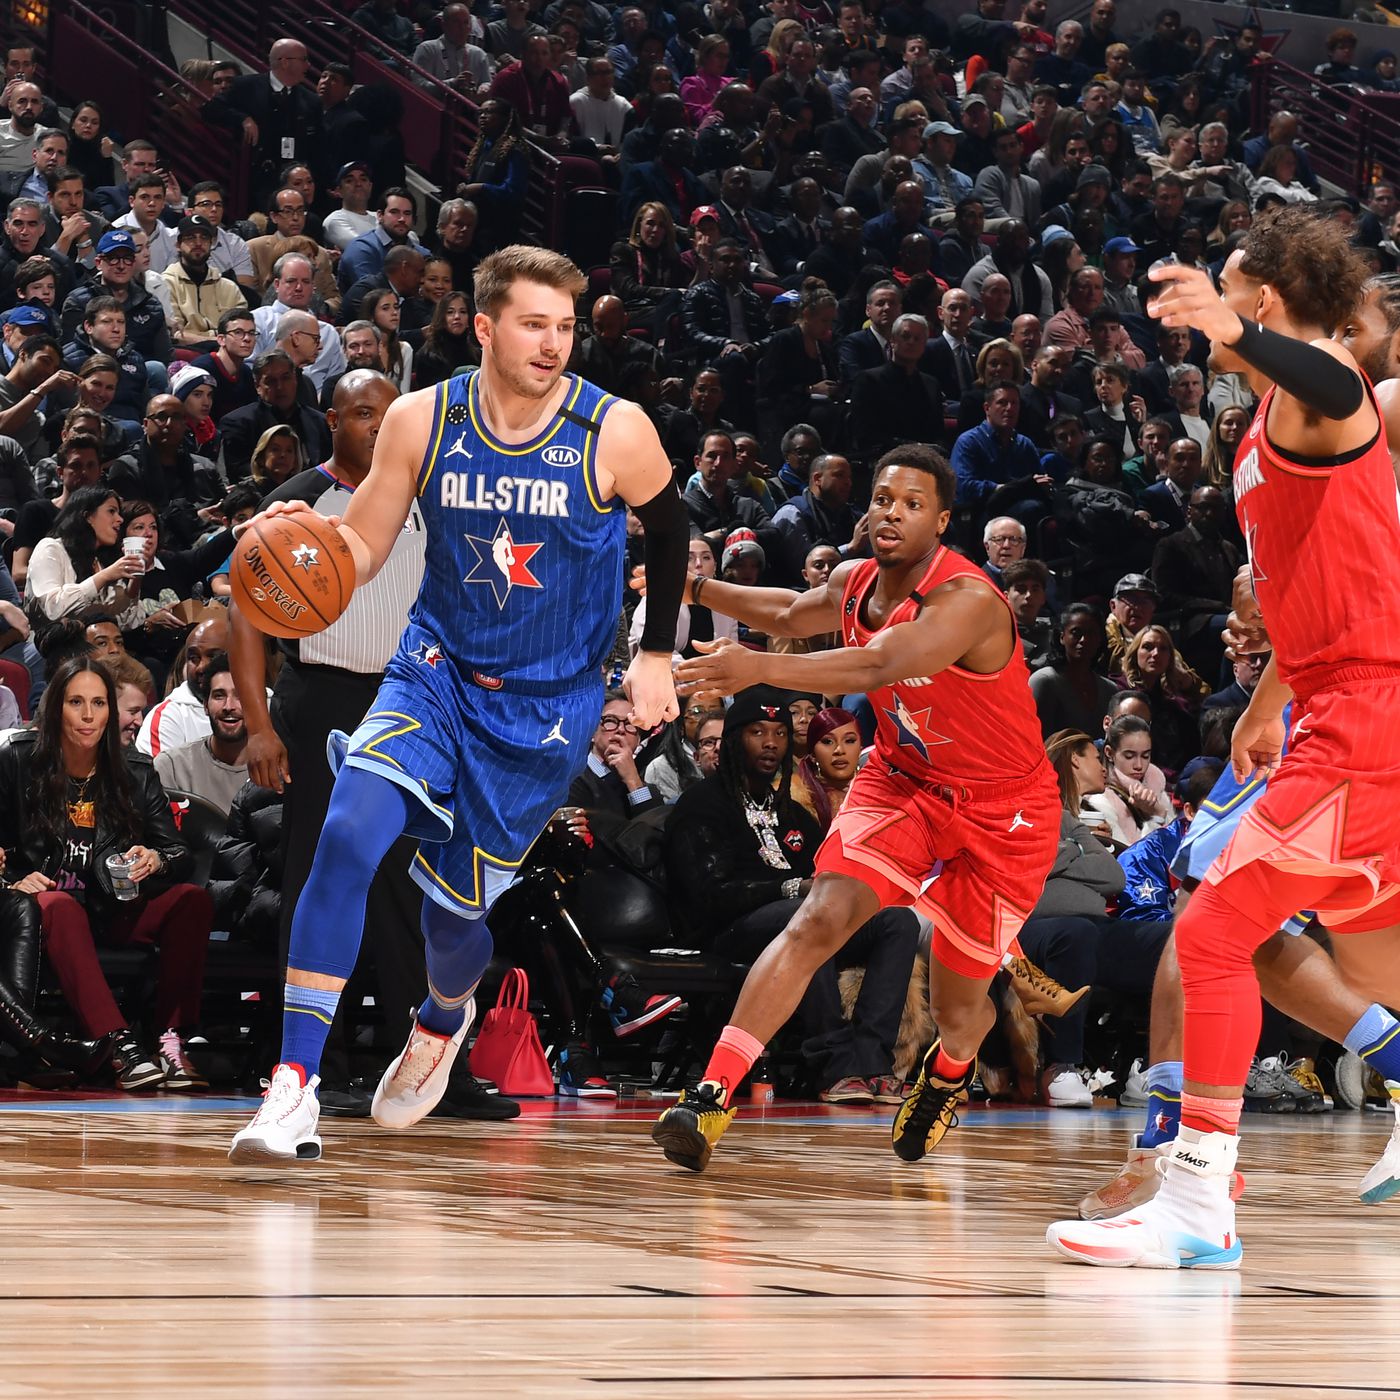 Luka Doncic experienced his first All-Star weekend — let the